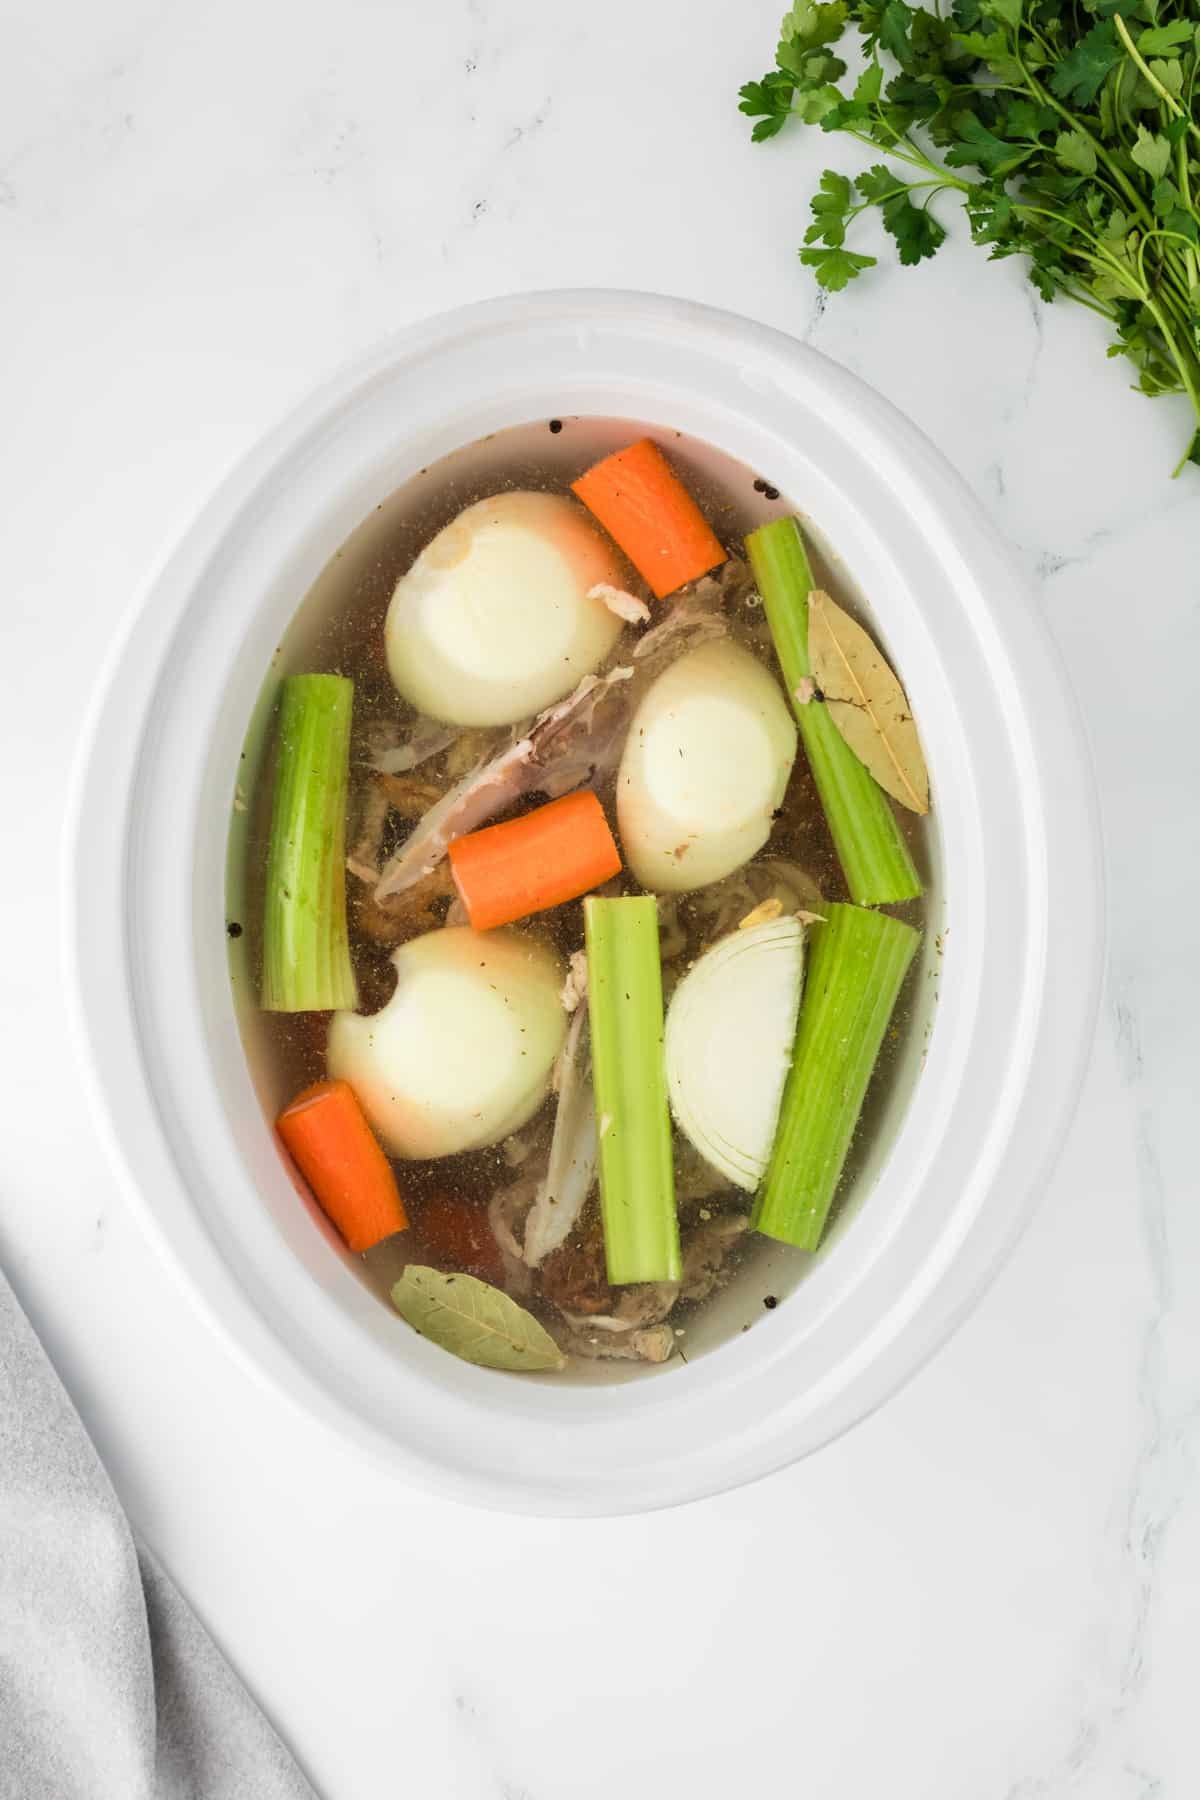 A crock pot filled with water, vegetables, and bones.